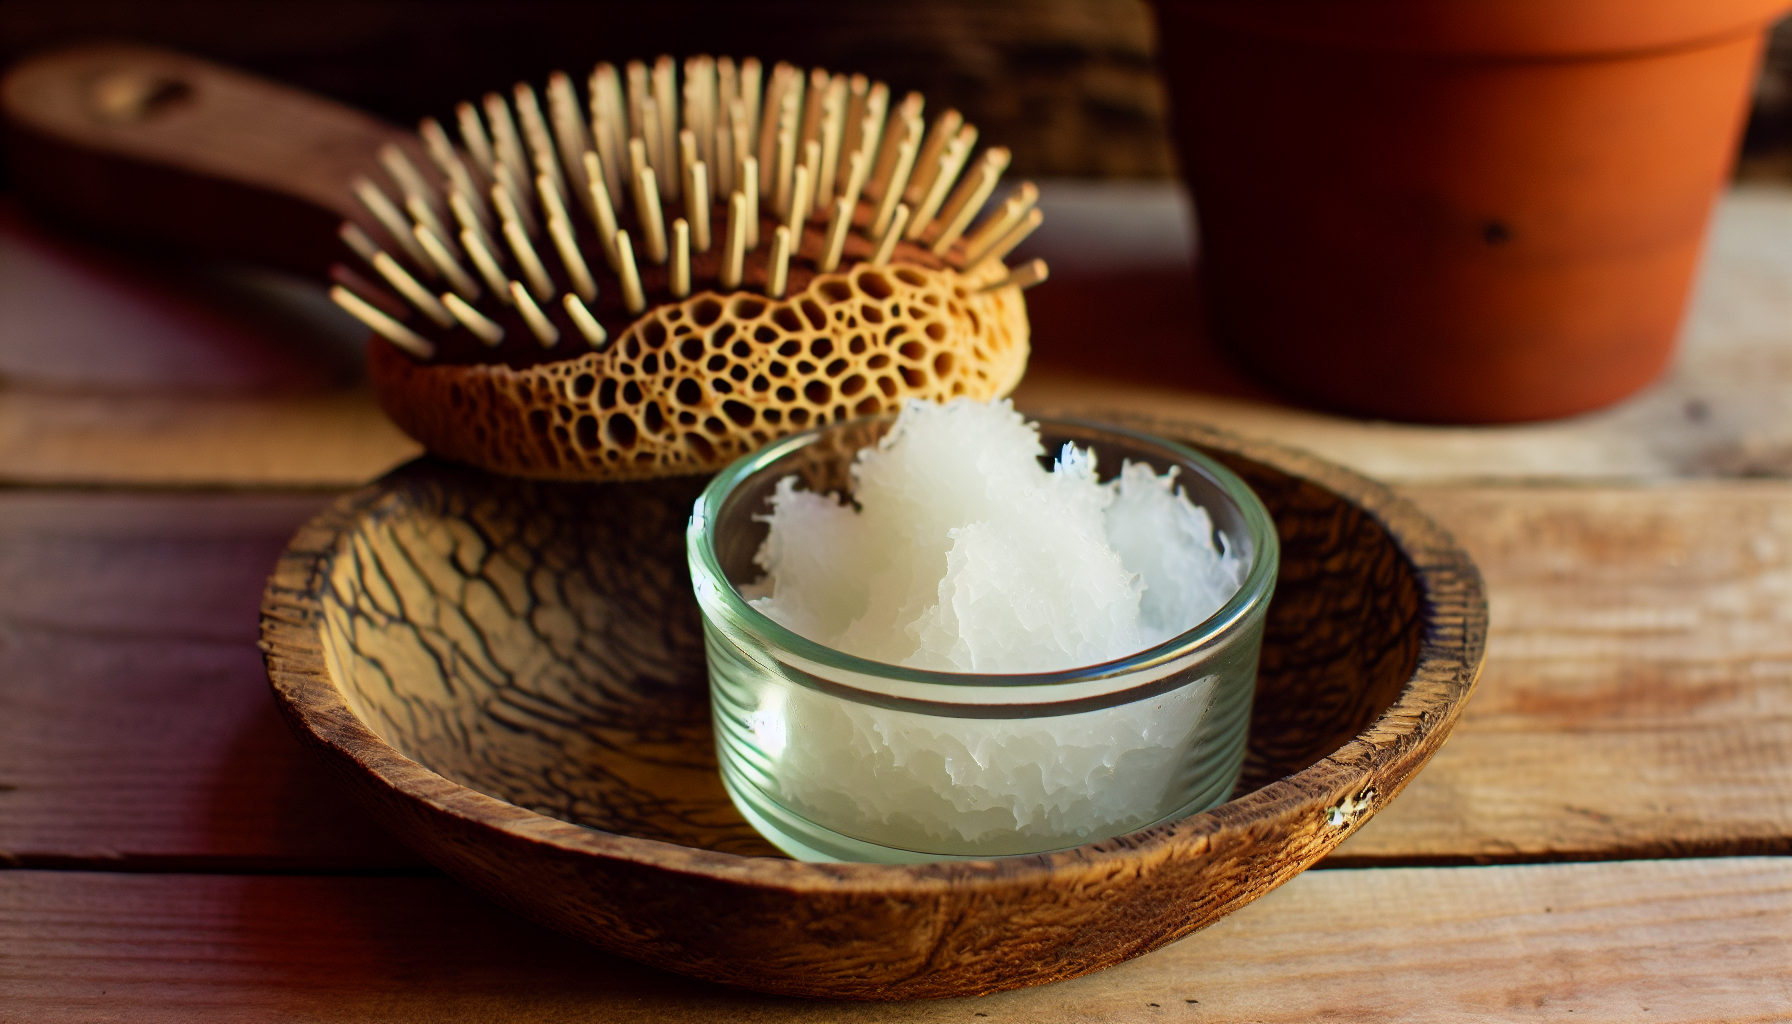 A bowl of organic coconut oil with a natural sponge and a hairbrush